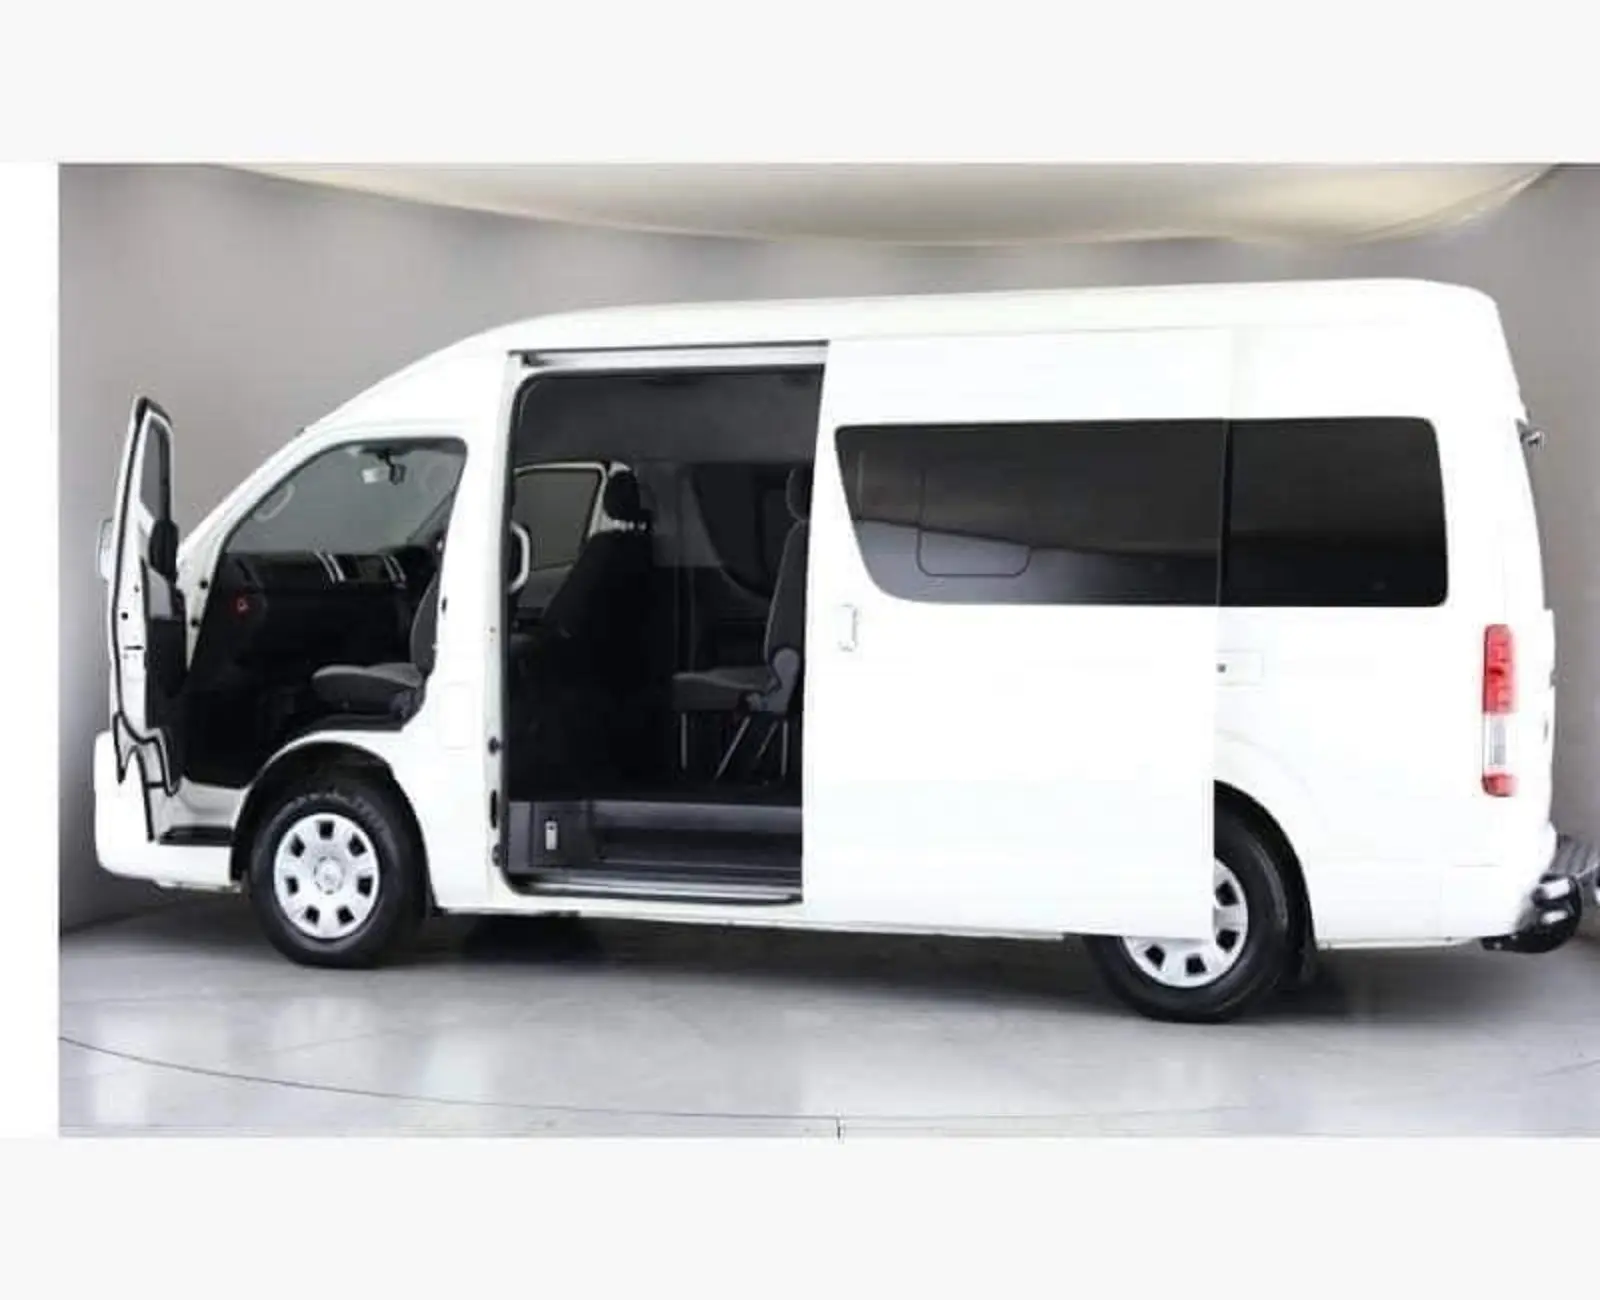 2022 USED TOYOTA HIACE BUS 15 SEATER VAN BUS READY TO SHIP RHD&LHD AVAILABLE